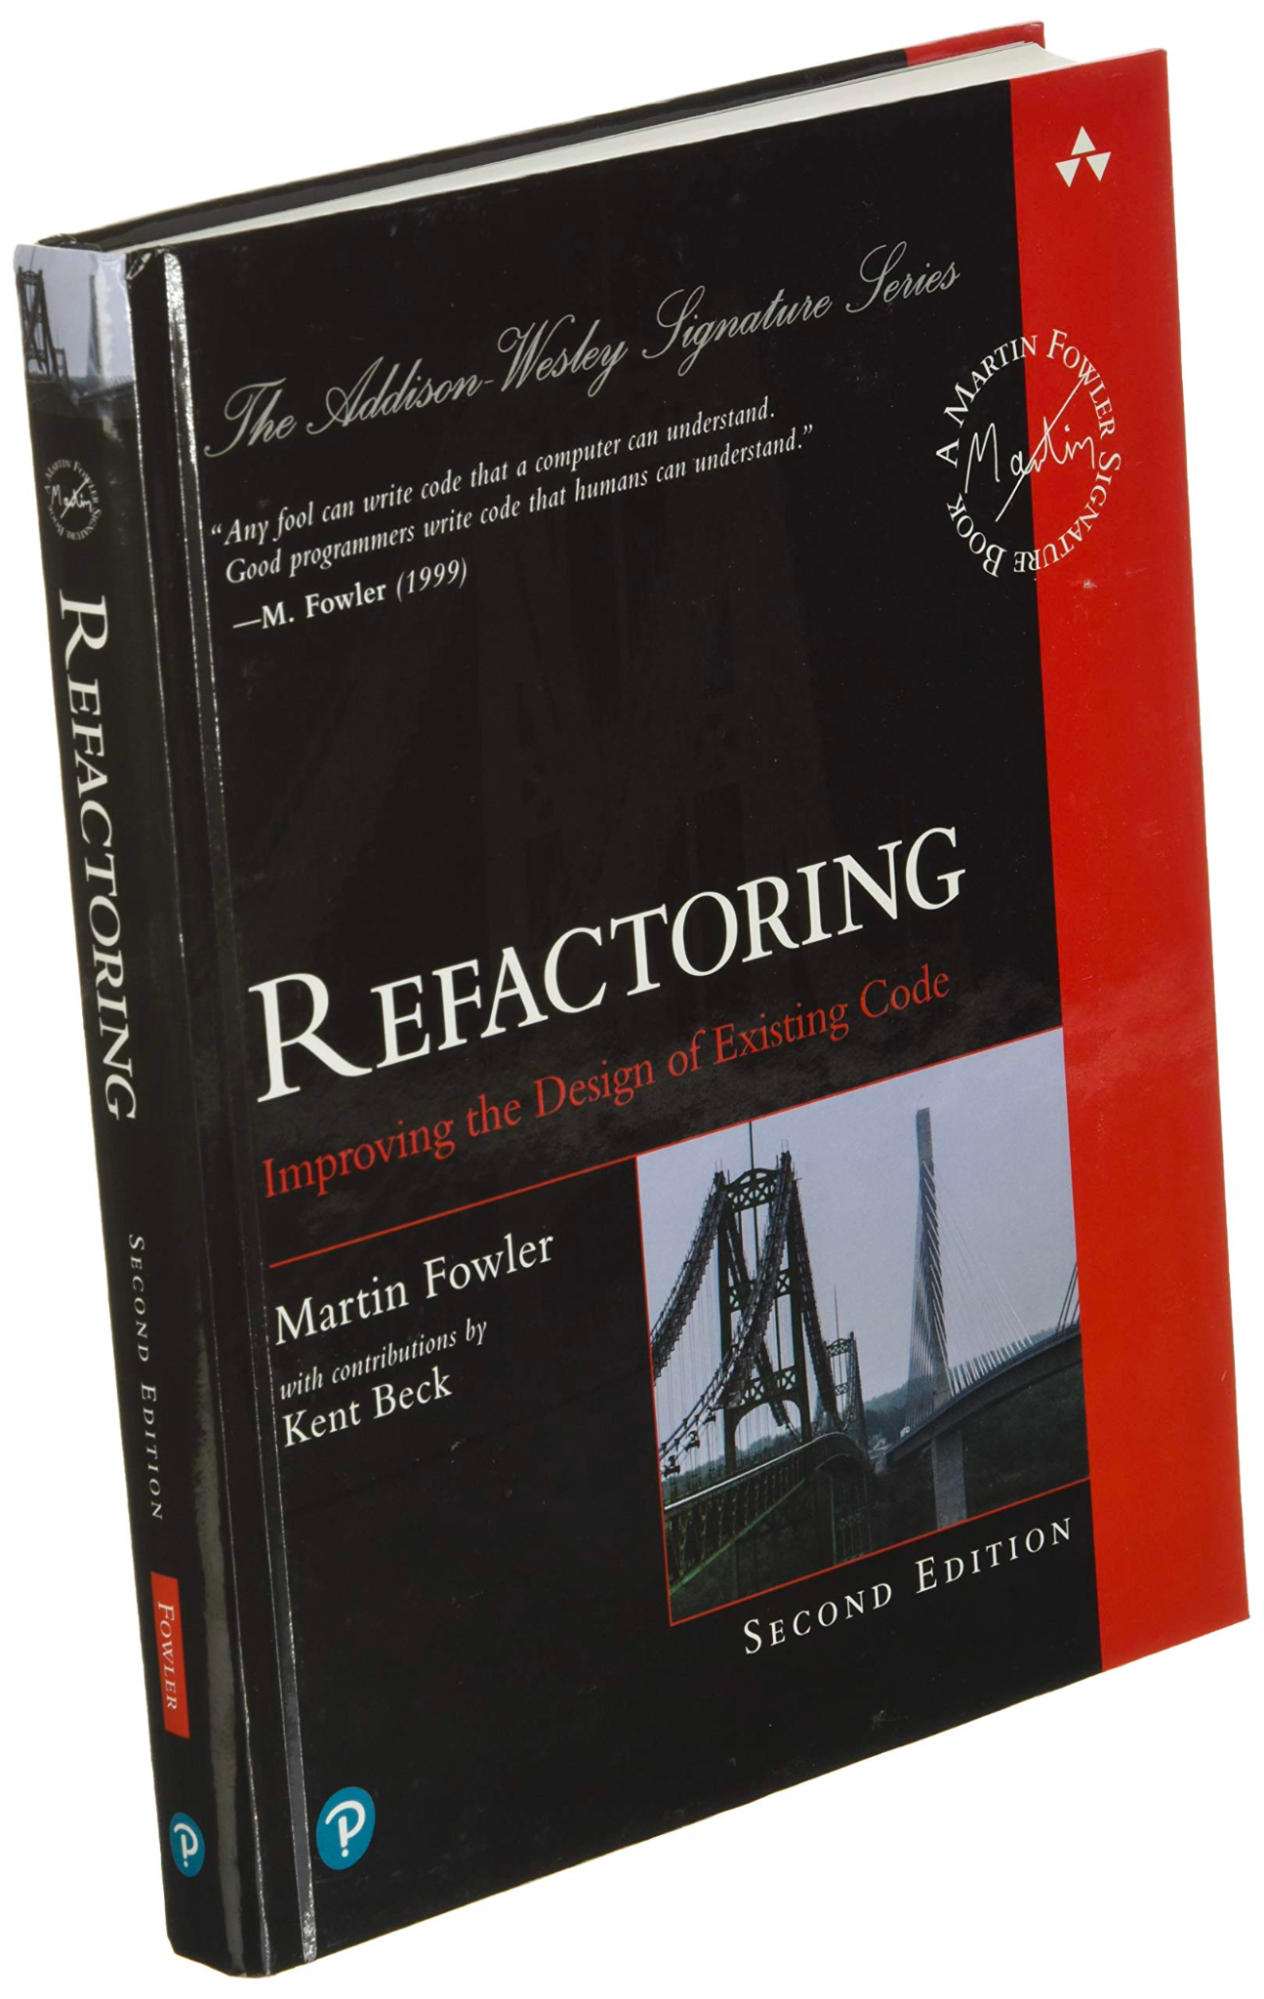 An image of the refactoring book by martin fowler